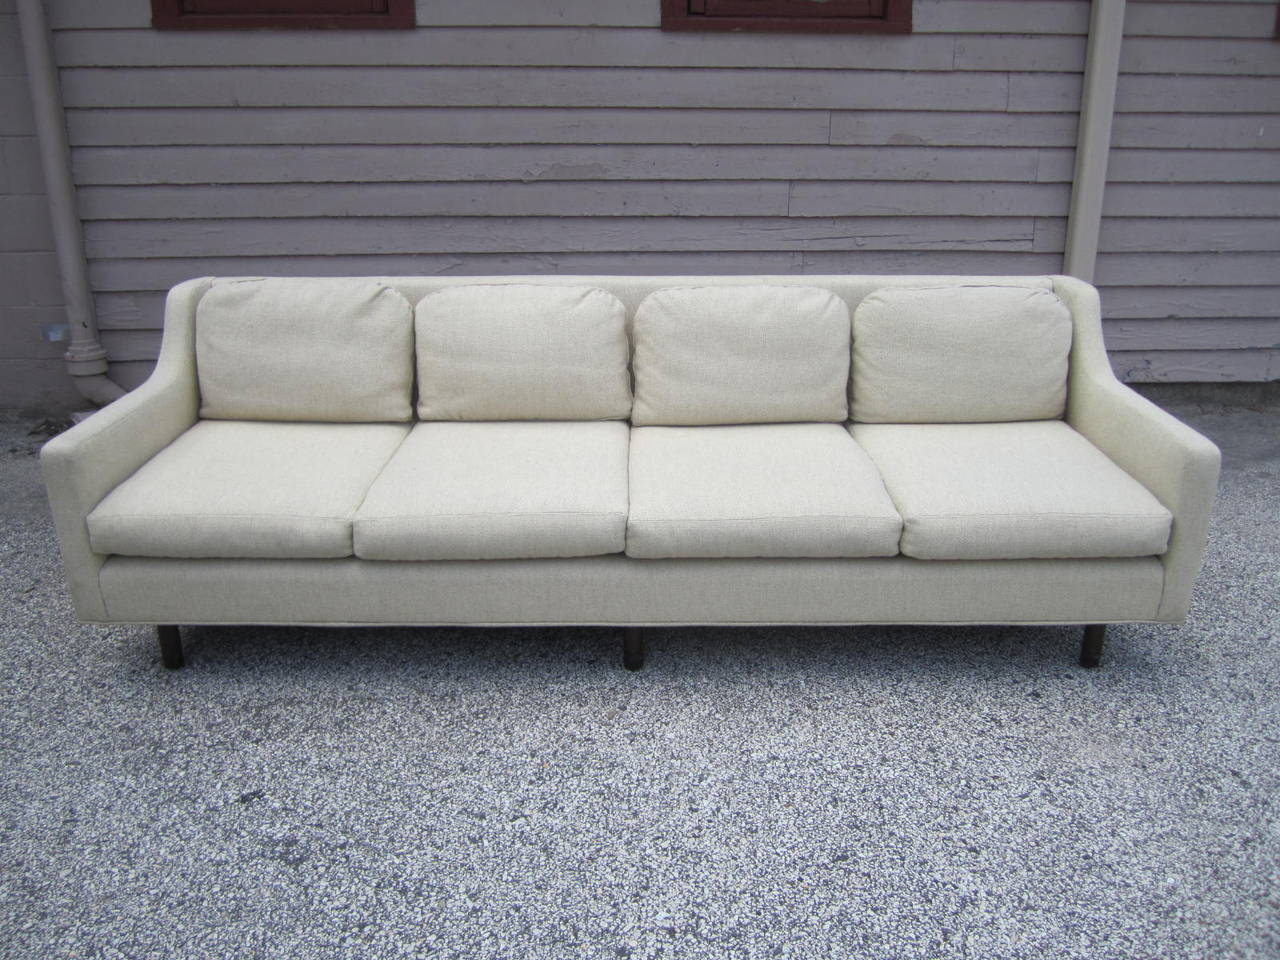 Lovely Dunbar style mid-century modern 4 seater sofa.  Super clean nubby oatmeal fabric is original and still looks great.  The cushions are down-filled and are super comfortable.  Came from an estate full of signed Dunbar pieces.